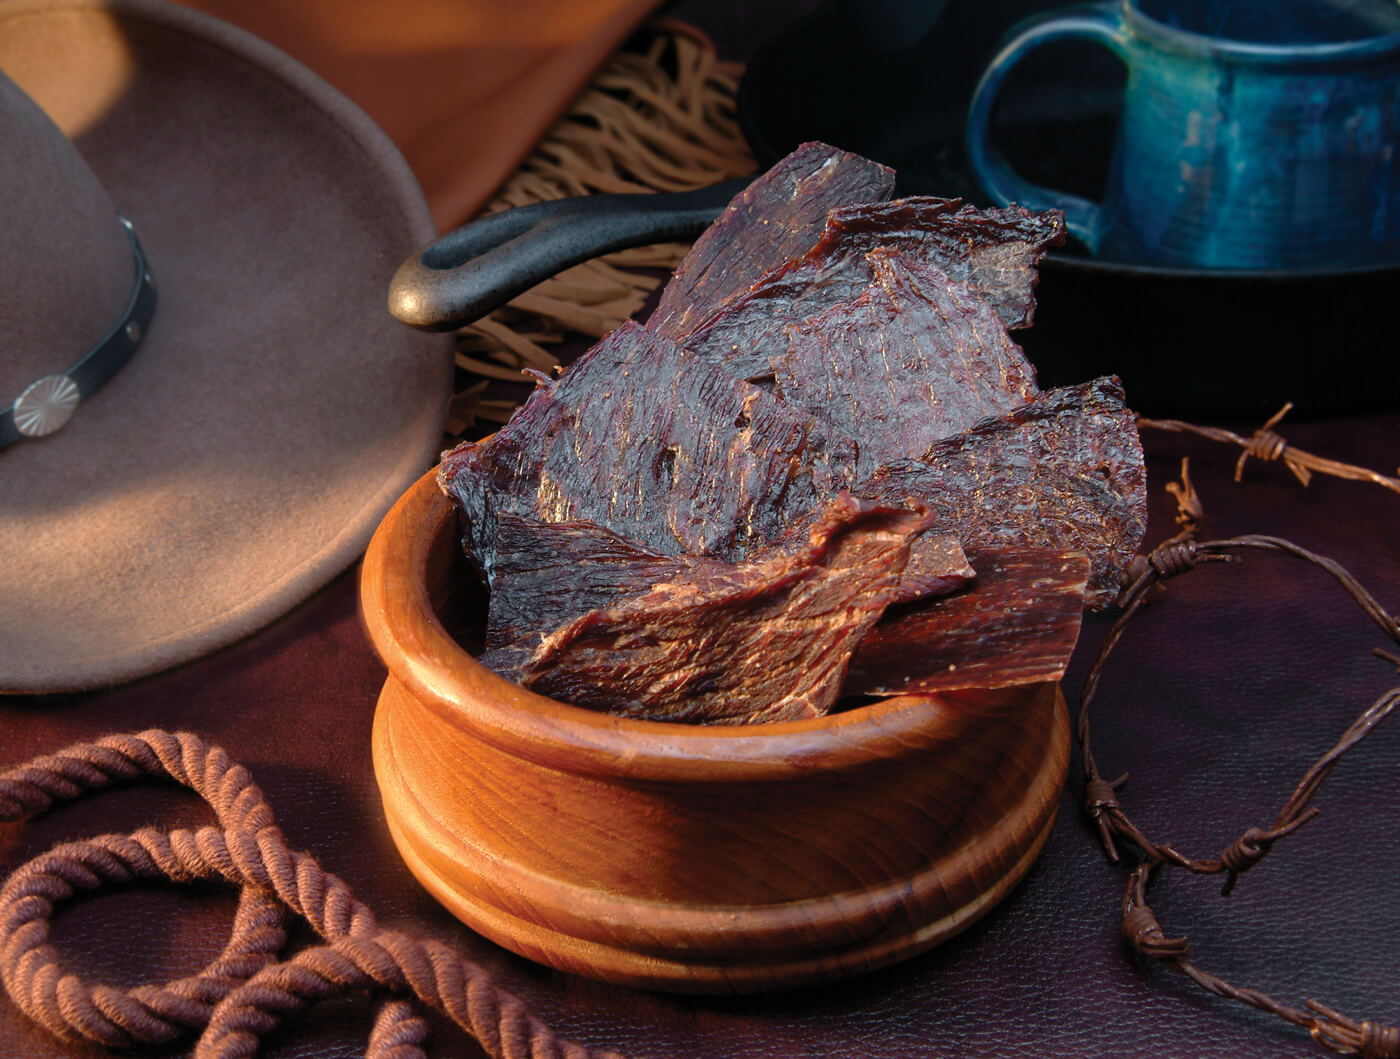 Dark strips of dried meat in a stack in a wooden bowl.